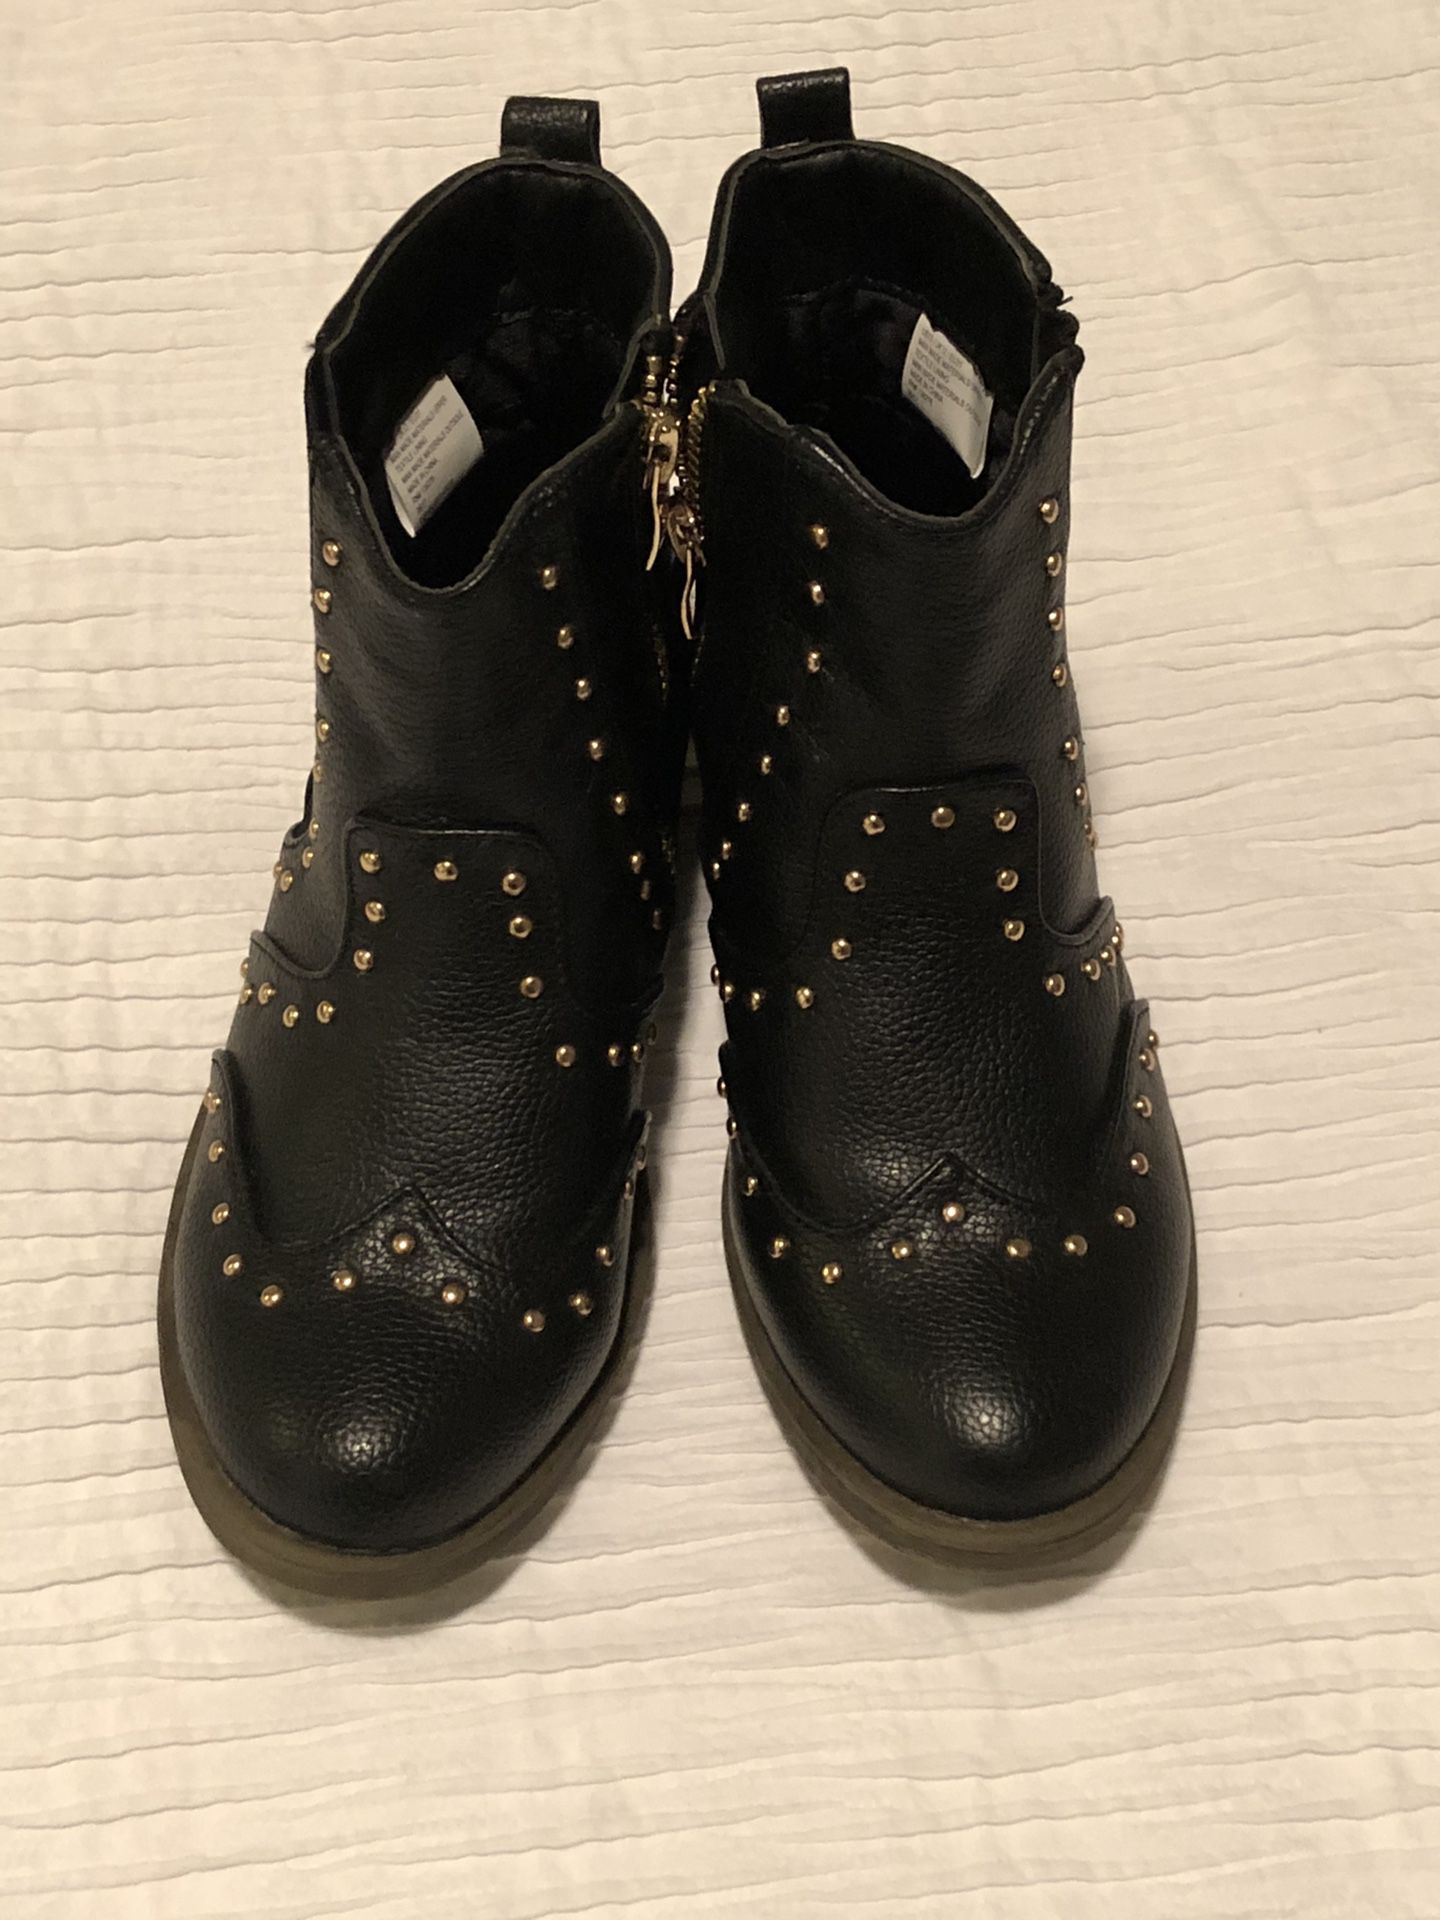 Black Girls Boots Size 13